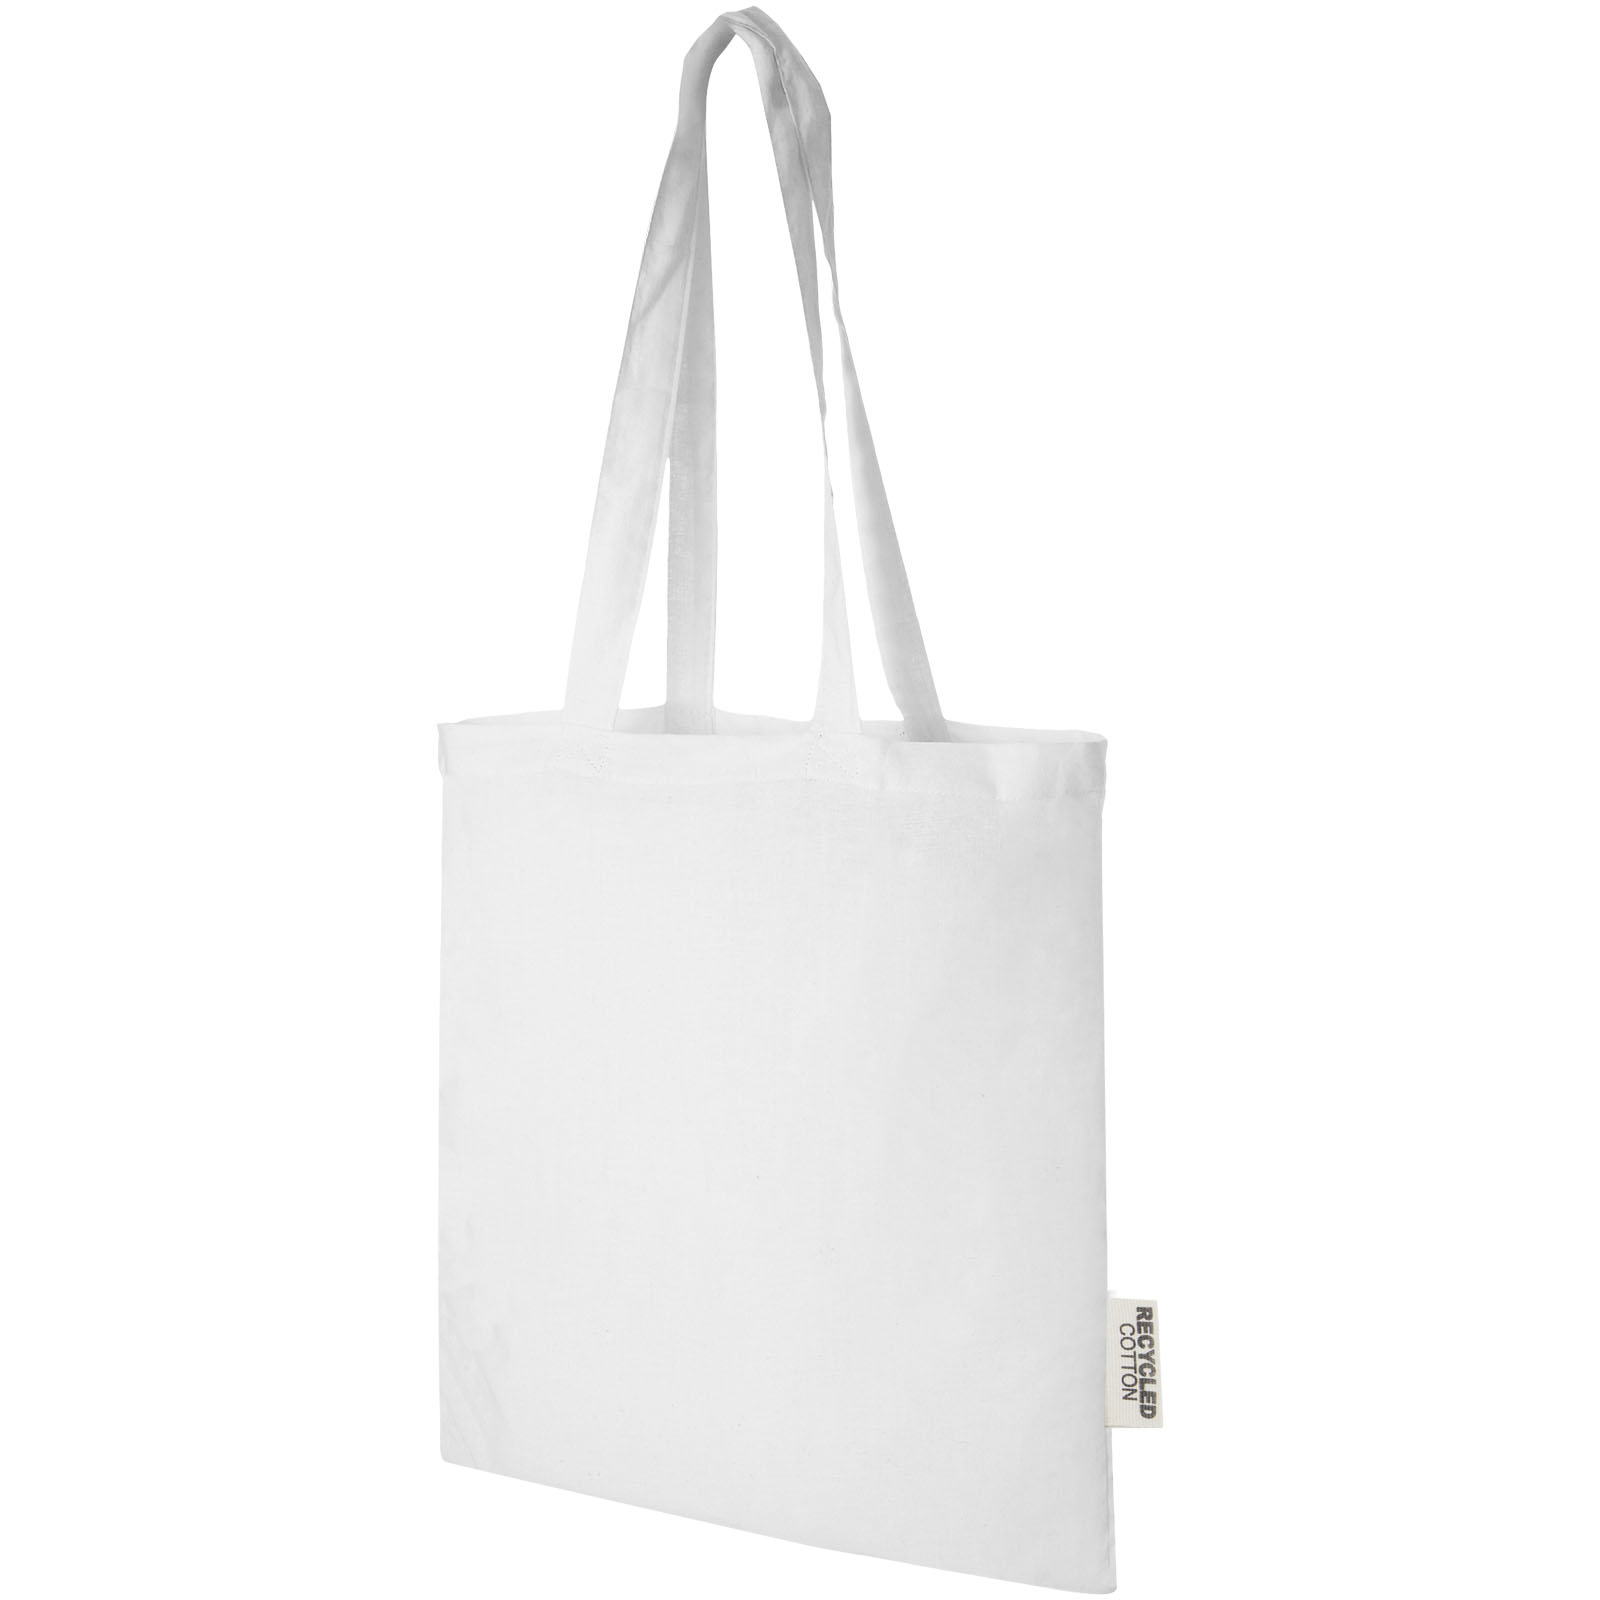 Advertising Shopping & Tote Bags - Madras 140 g/m2 GRS recycled cotton tote bag 7L - 0